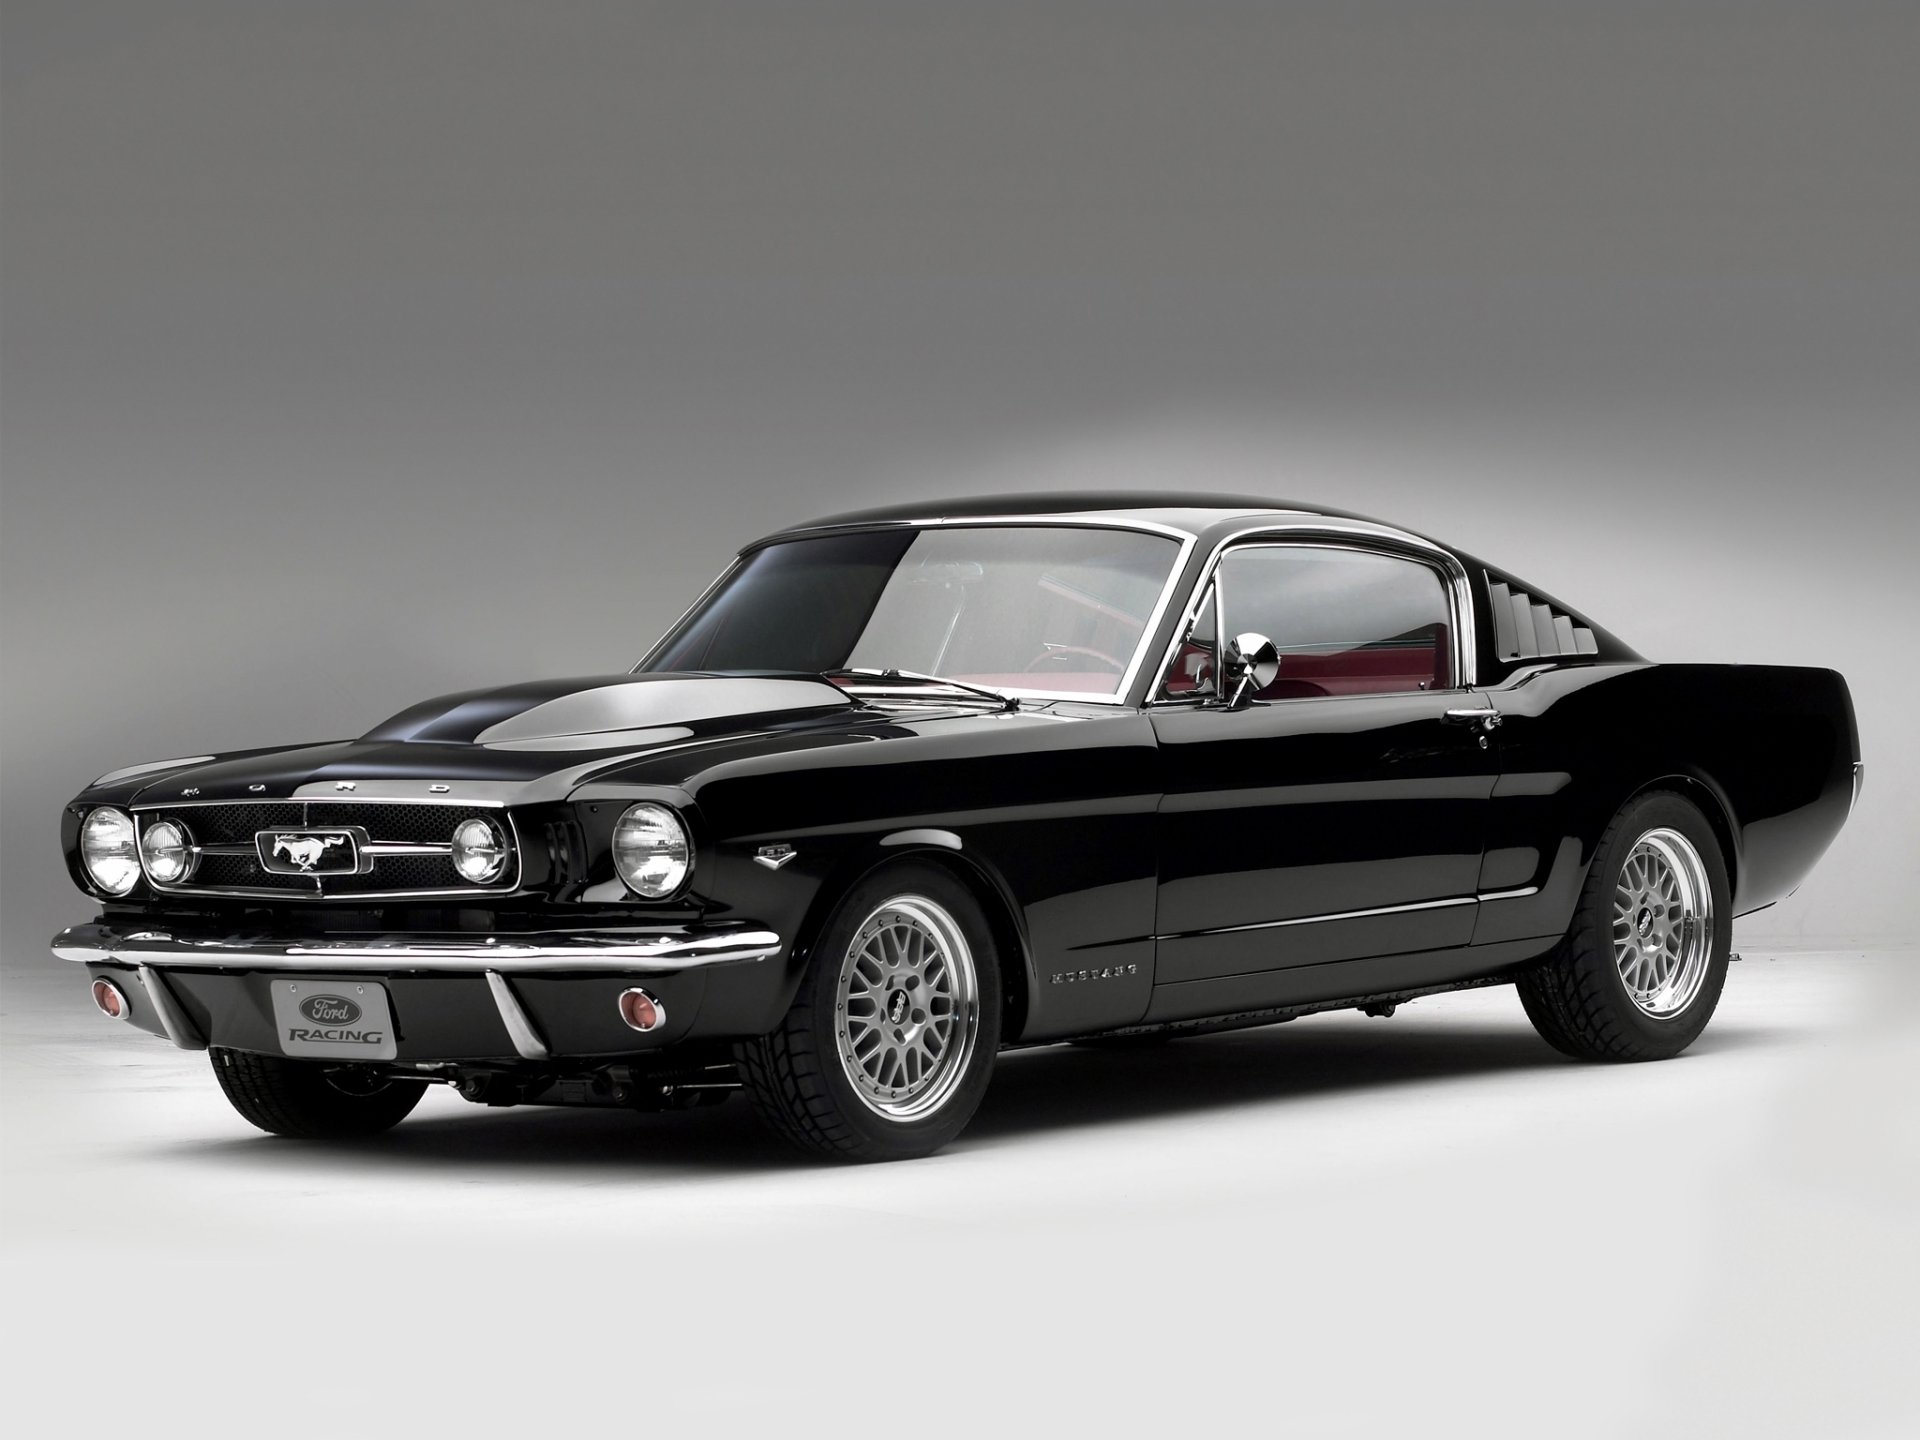 Awesome Ford Mustang free wallpaper ID:205836 for hd 1920x1440 desktop